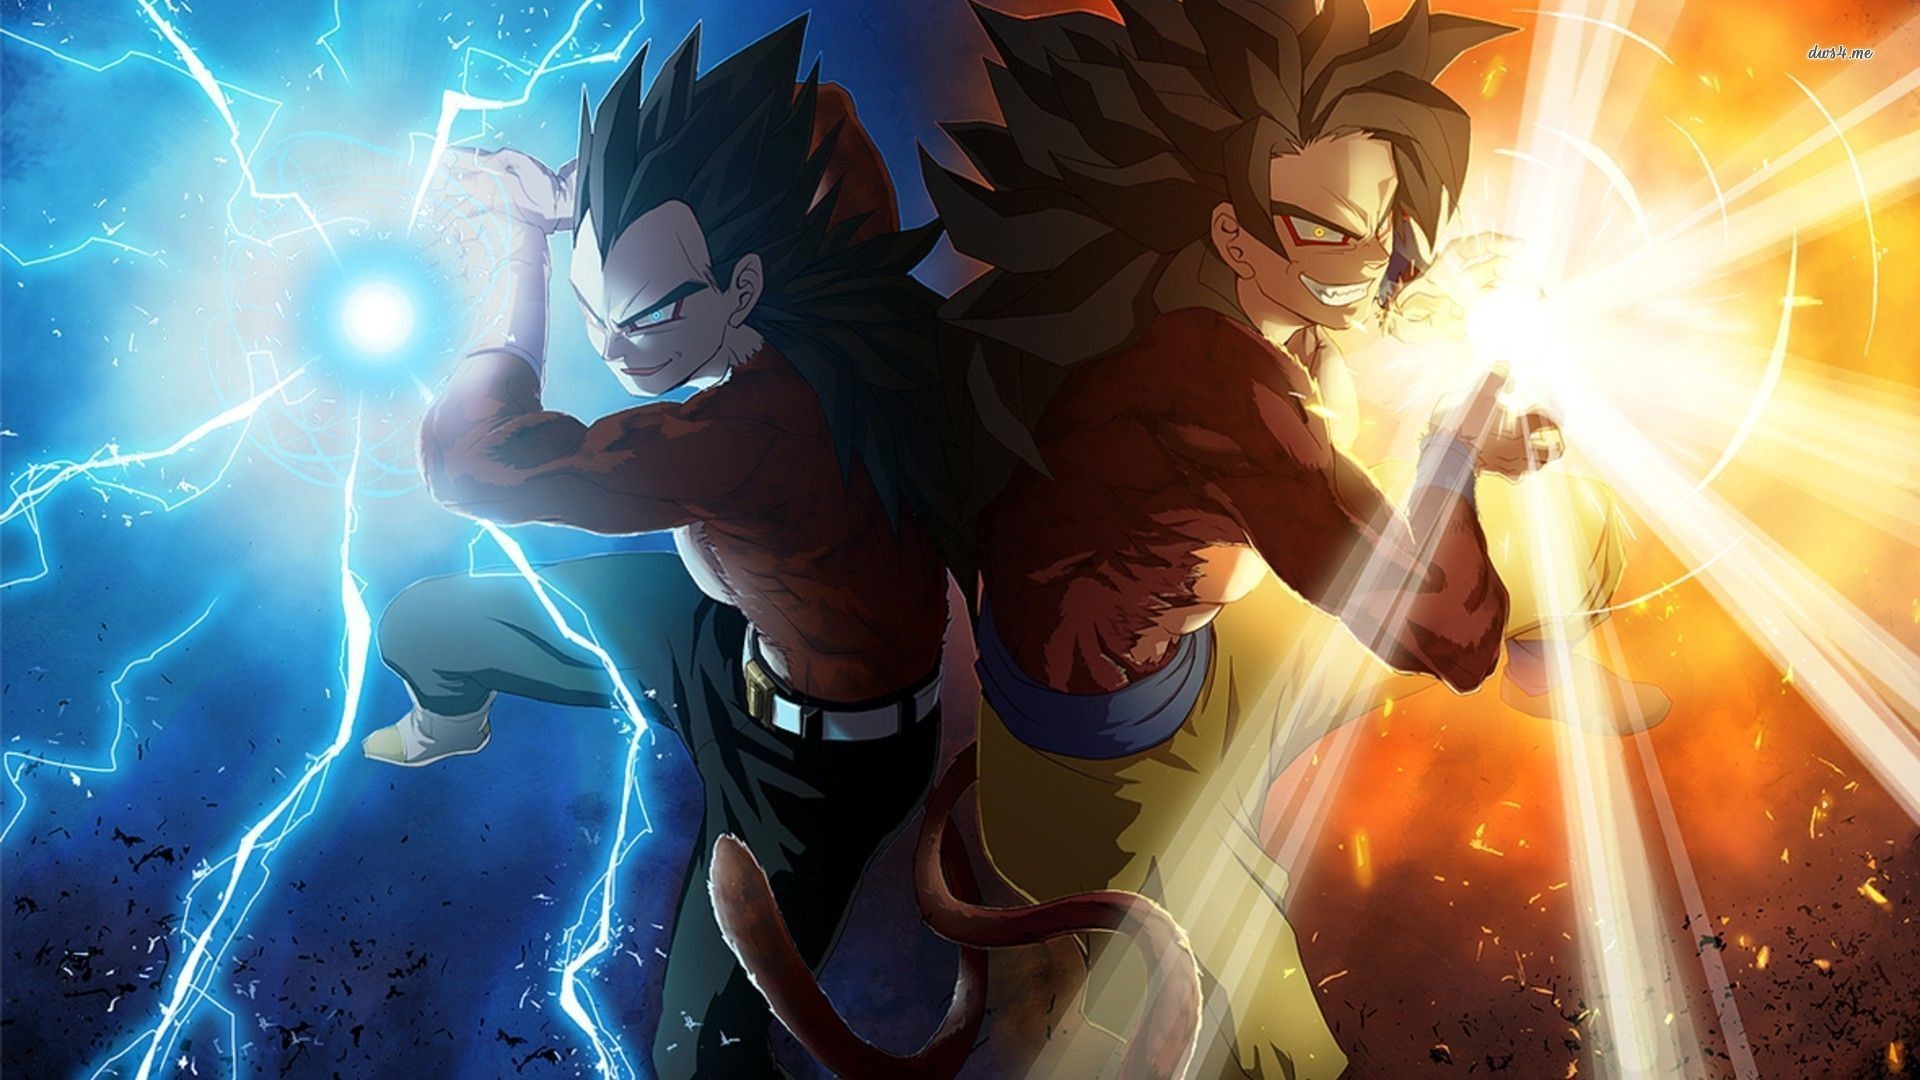 Goku SSJ4 Wallpaper For Desktop with image resolution 1920x1080 pixel. You can use this wallpaper as background for your desktop Computer Screensavers, Android or iPhone smartphones